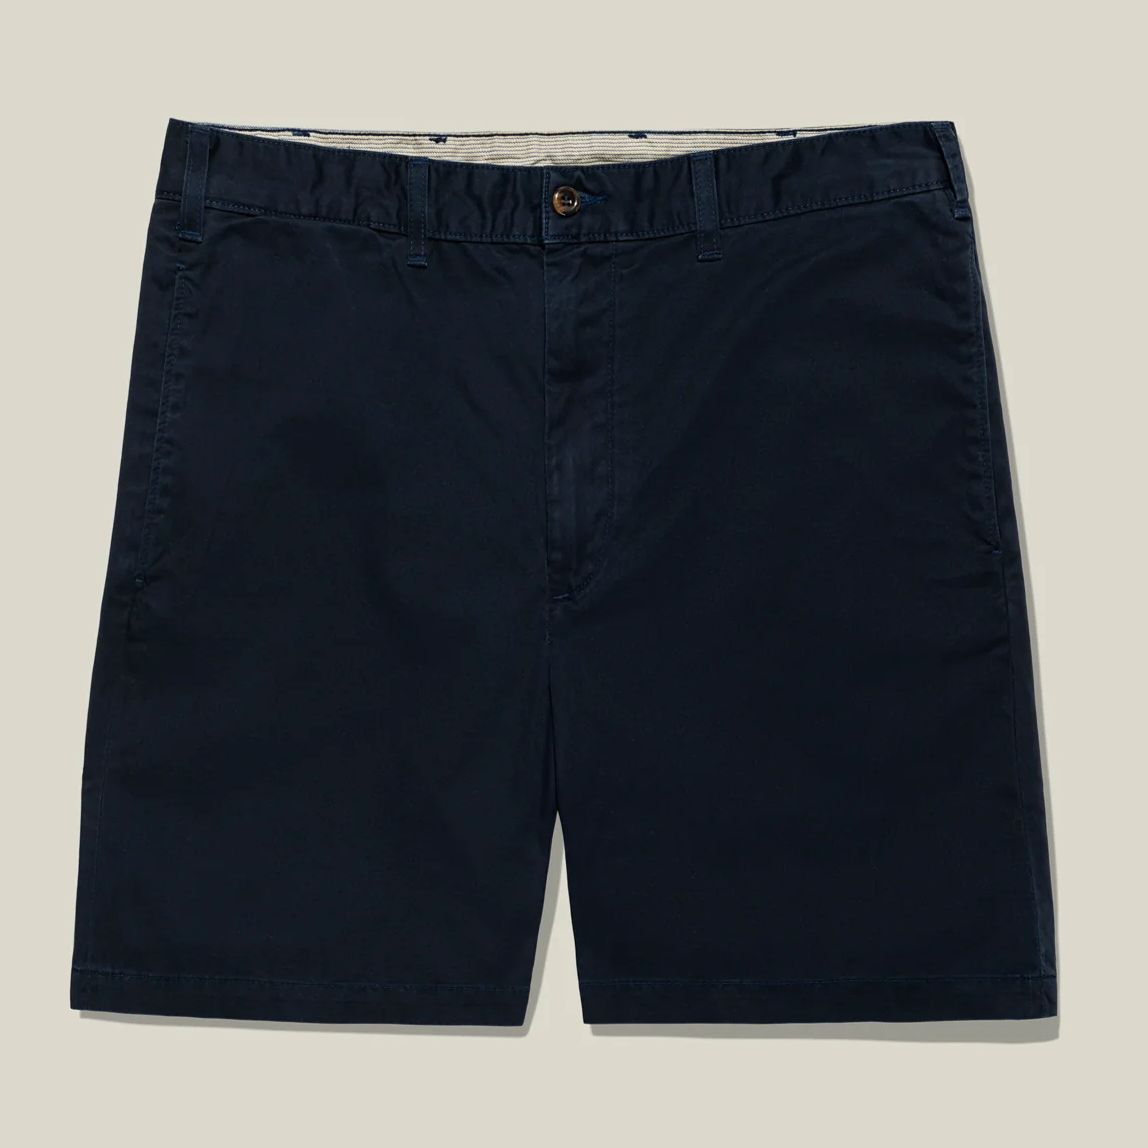 M2 Classic Fit Broken-In Chamois Twill Shorts in Navy by Bills Khakis